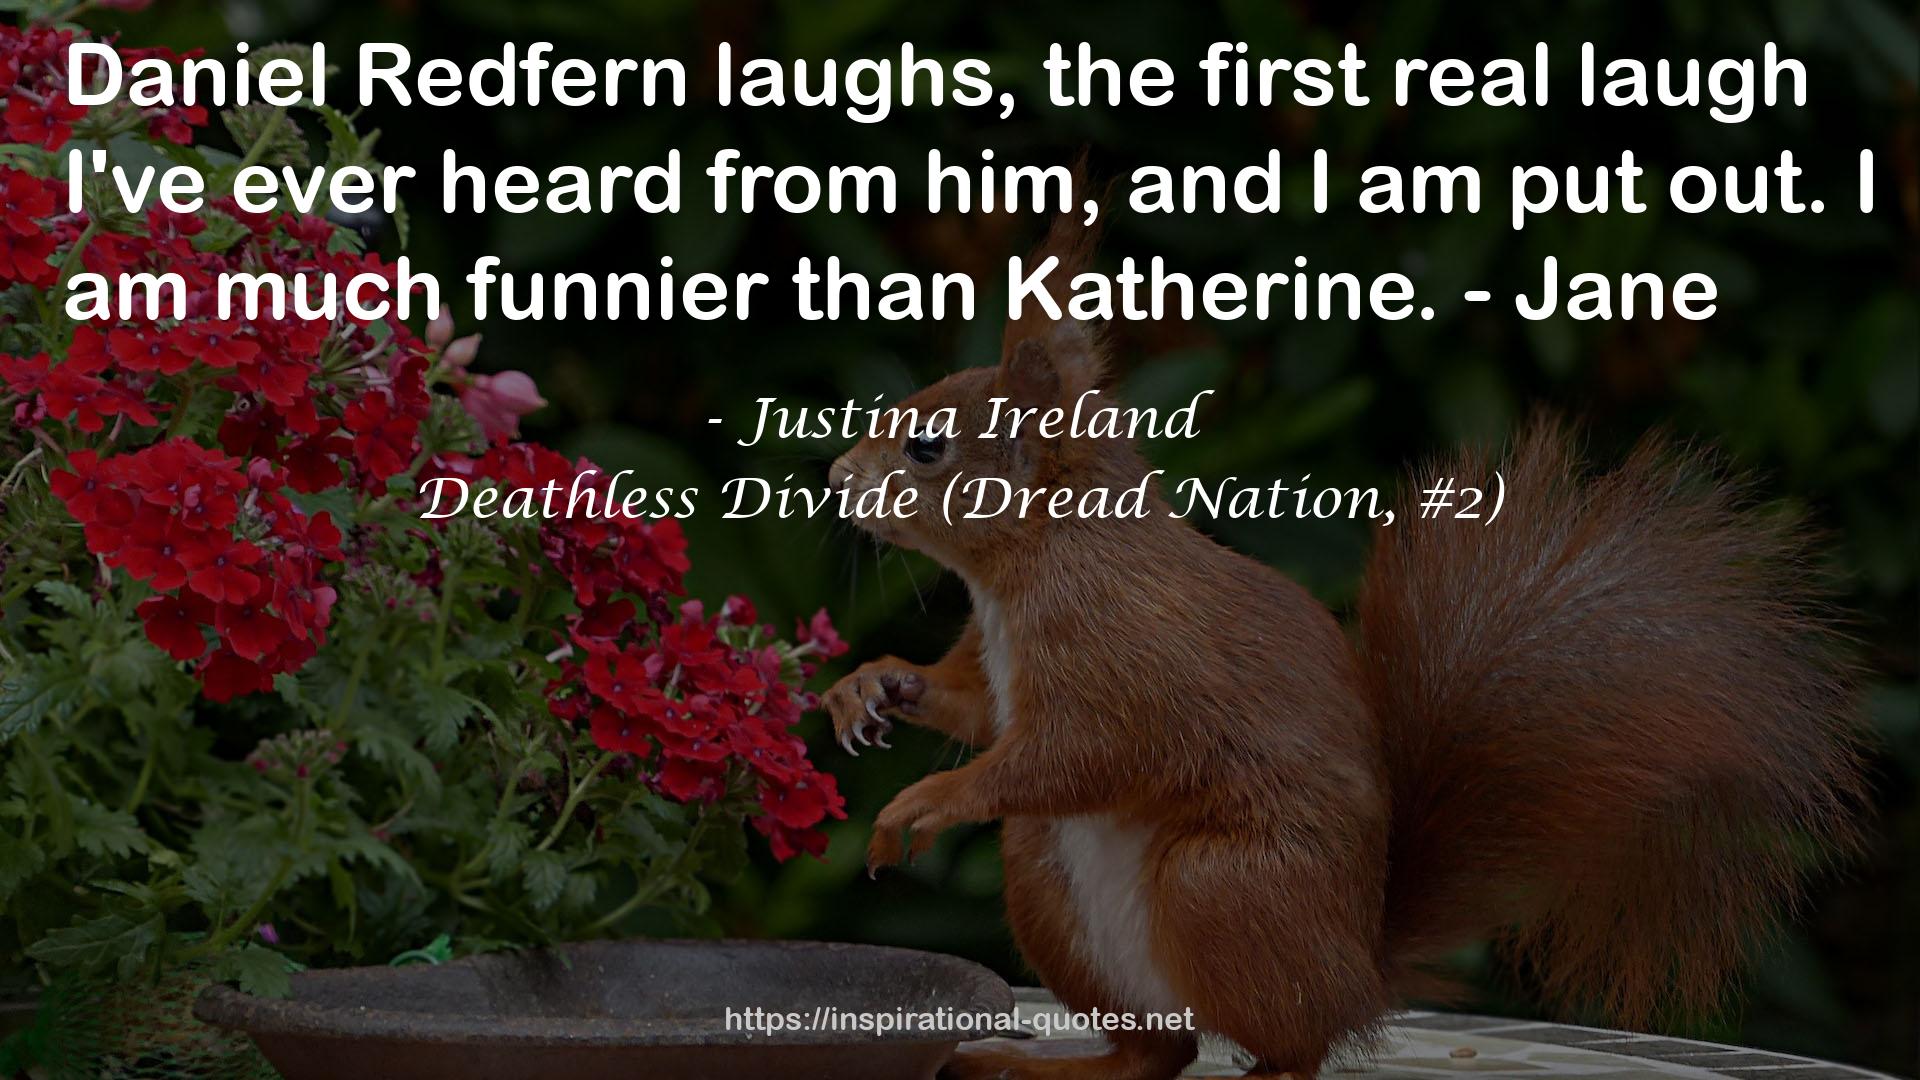 Deathless Divide (Dread Nation, #2) QUOTES